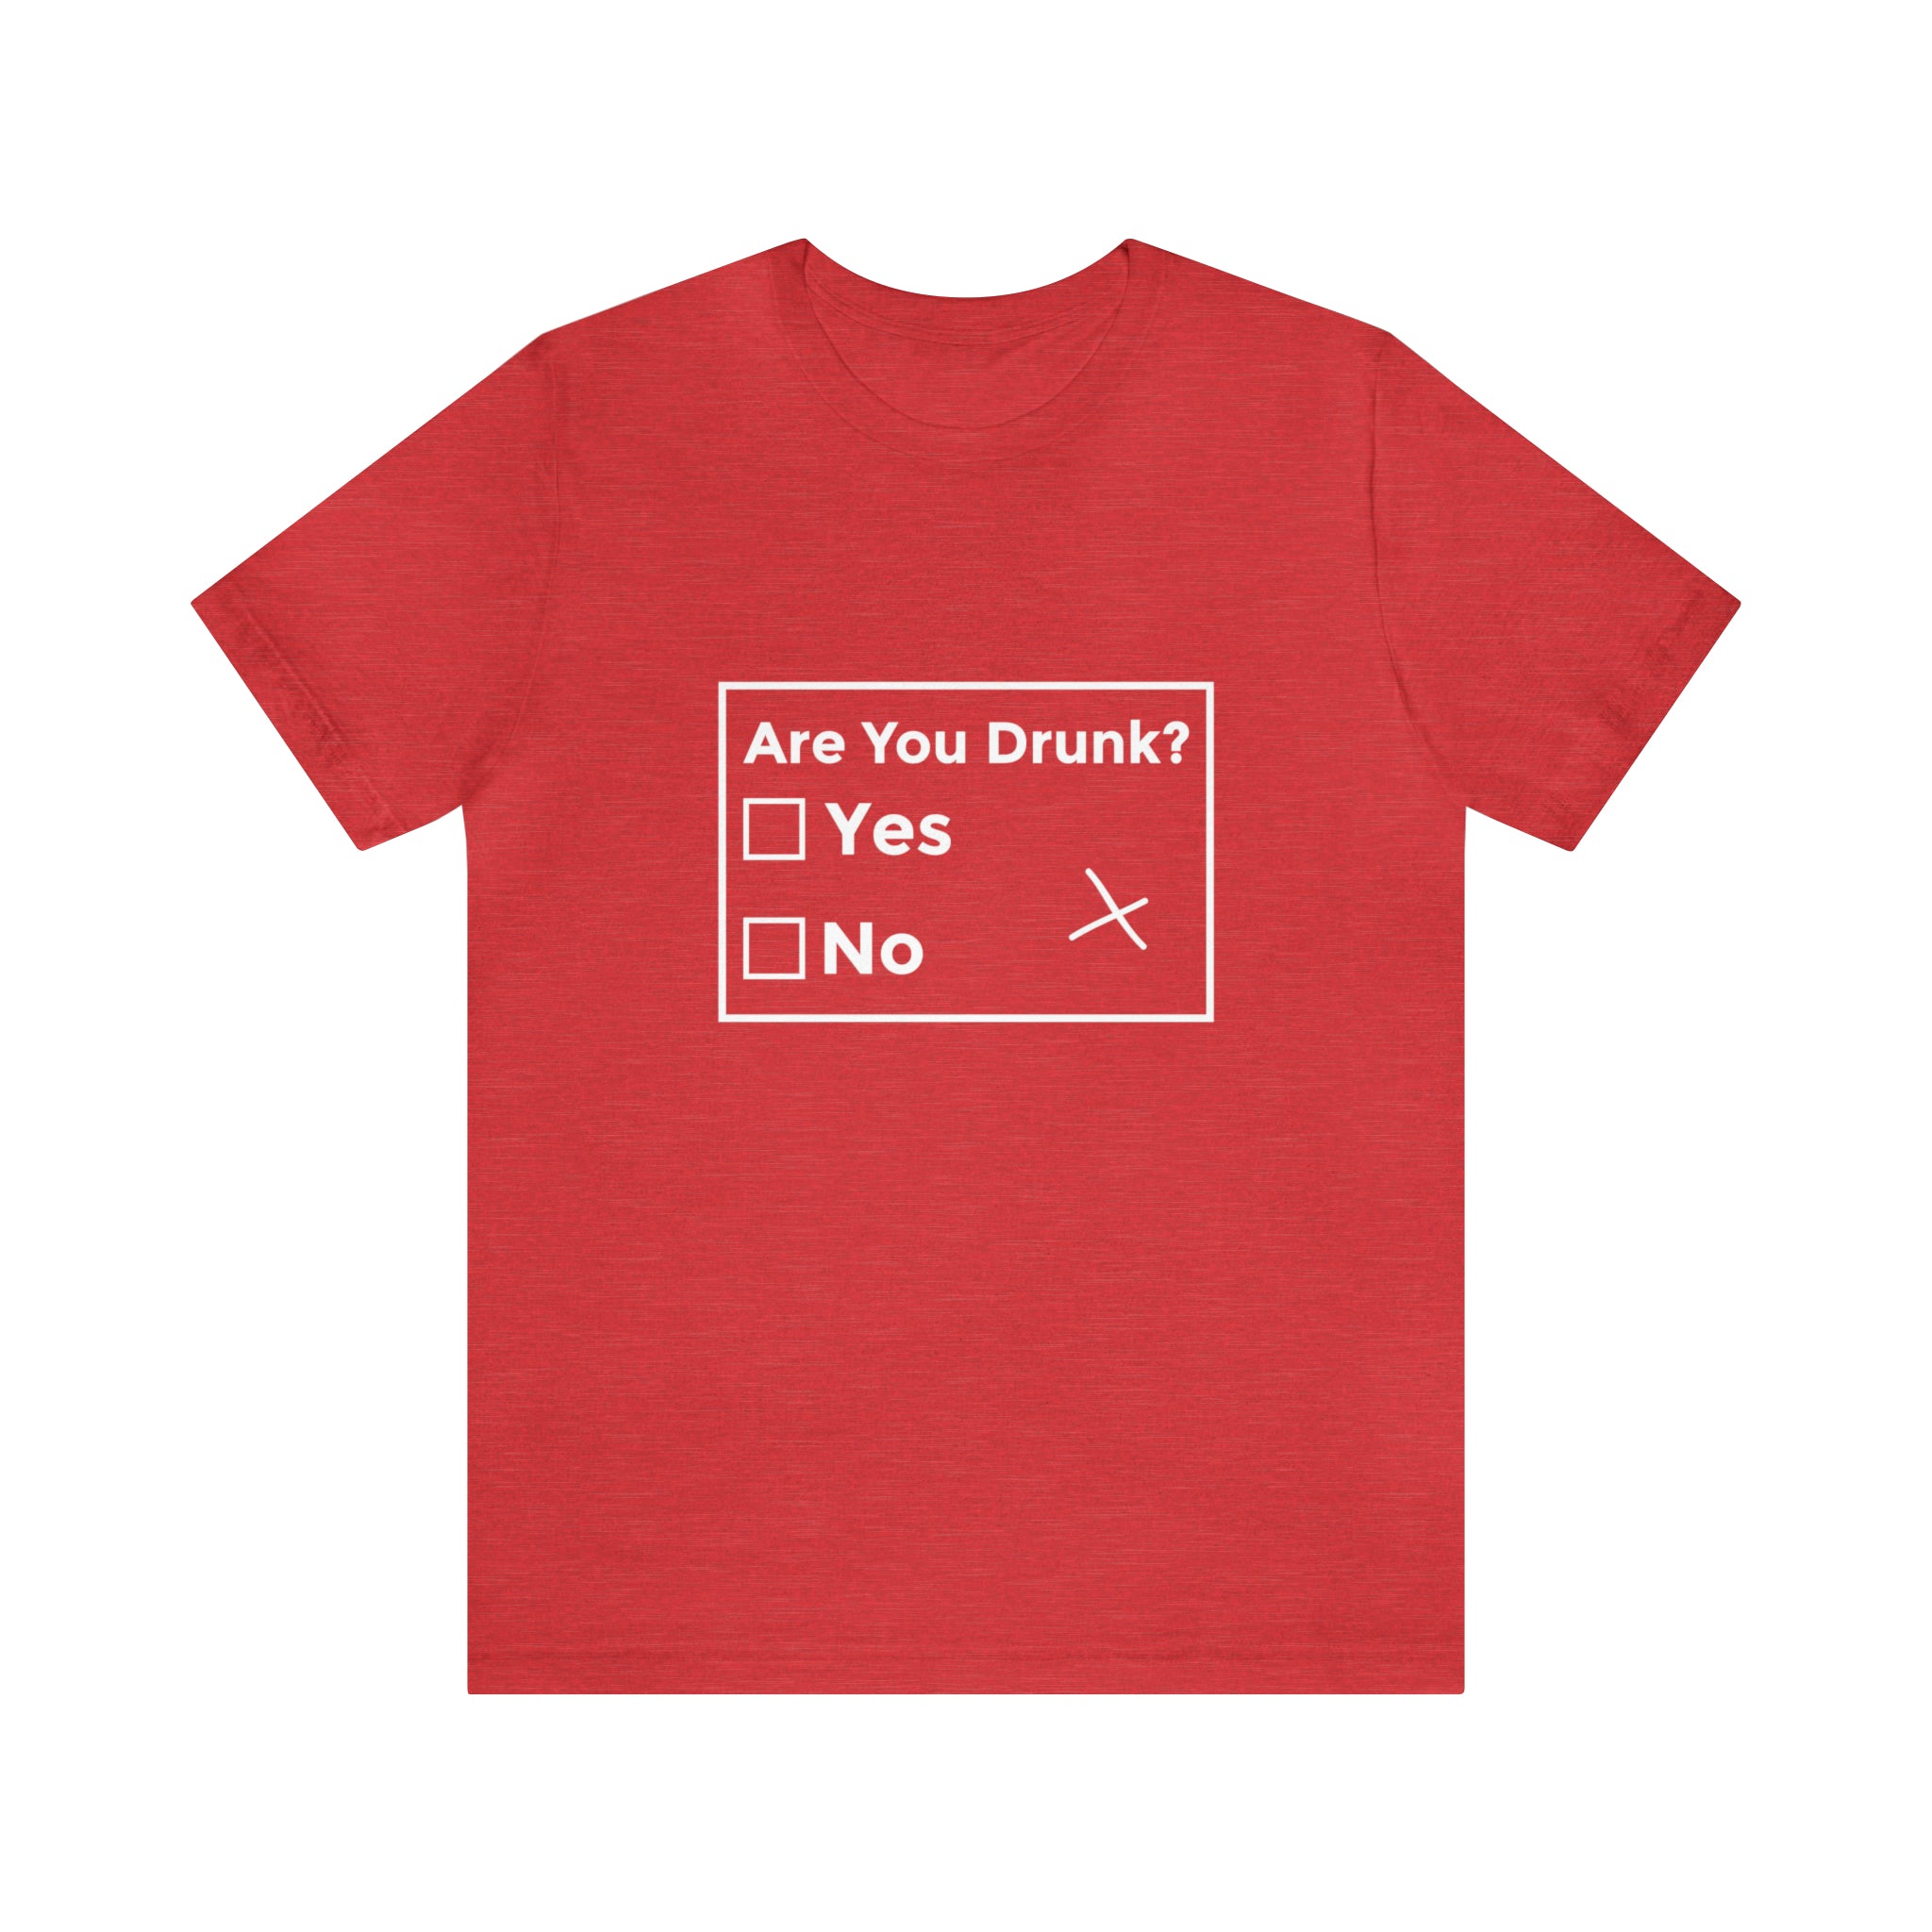 A red Are You Drunk? T-shirt with white slogan.